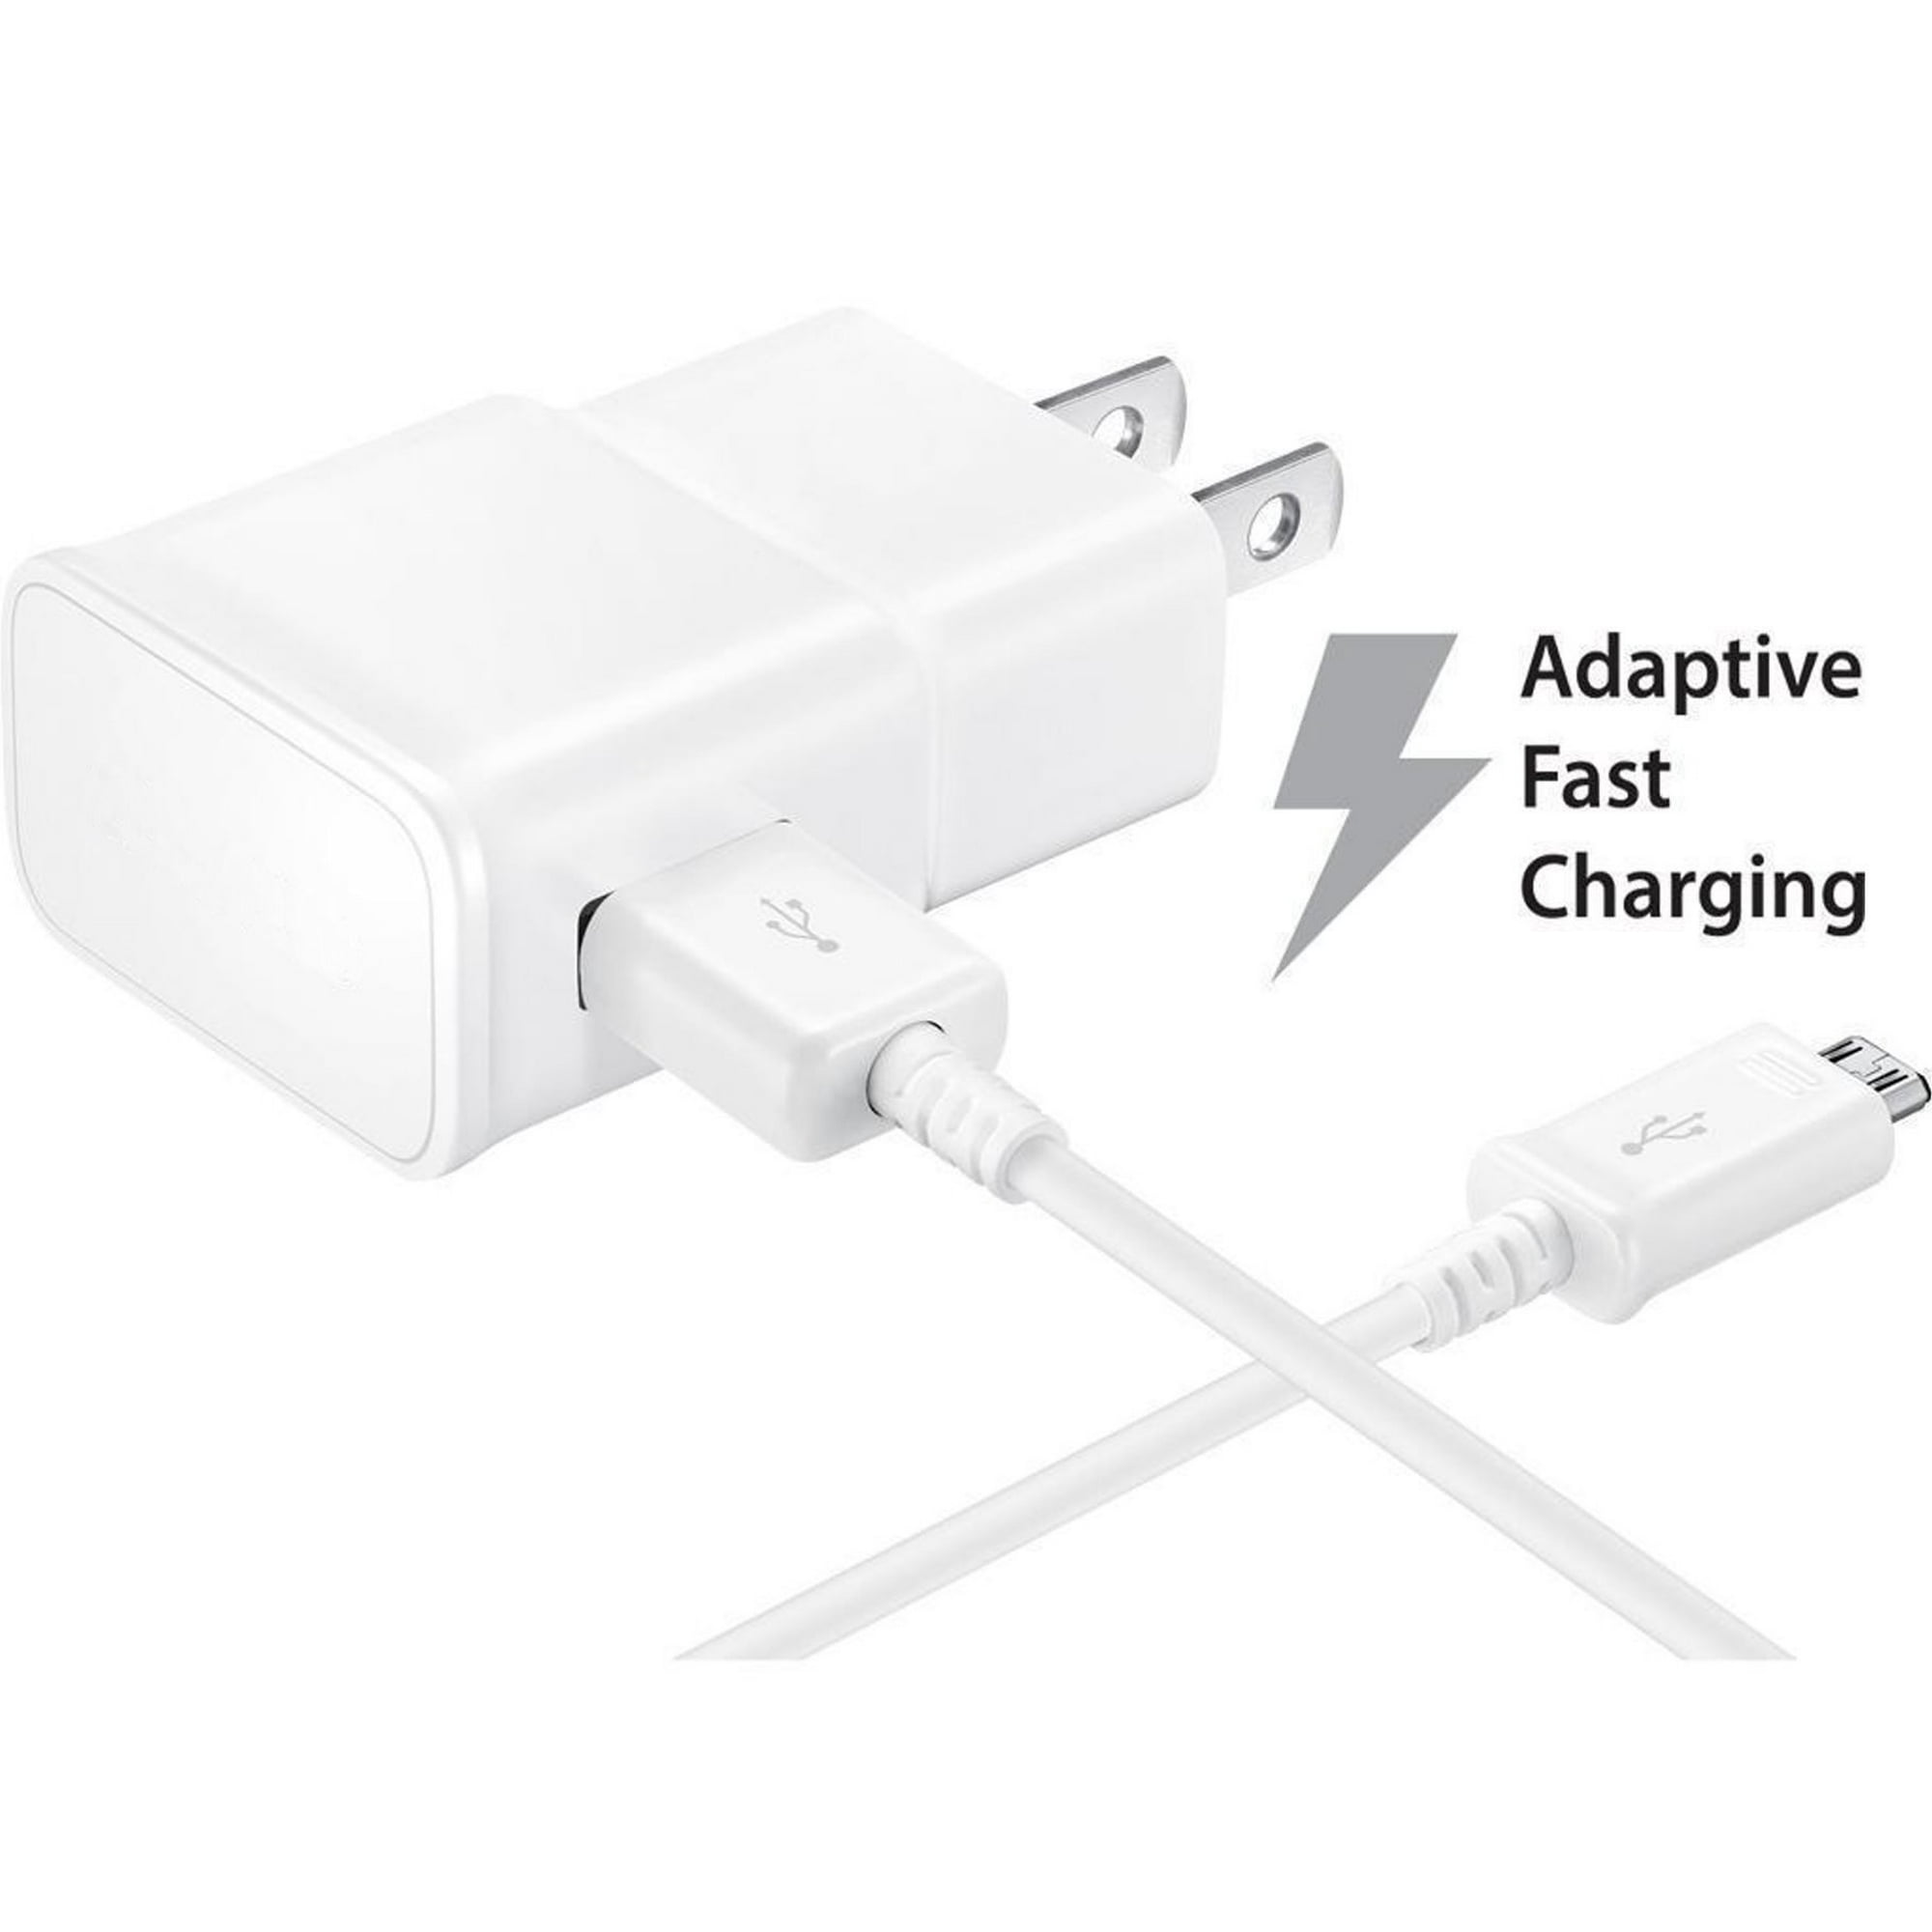 Adaptive Fast Charger Kit Compatible with Motorola Moto G5 Plus  Devices-[Wall Charger+5 FT Micro USB Cable]-AFC uses Dual voltages for up  to 50% Faster Charging!-White | Walmart Canada